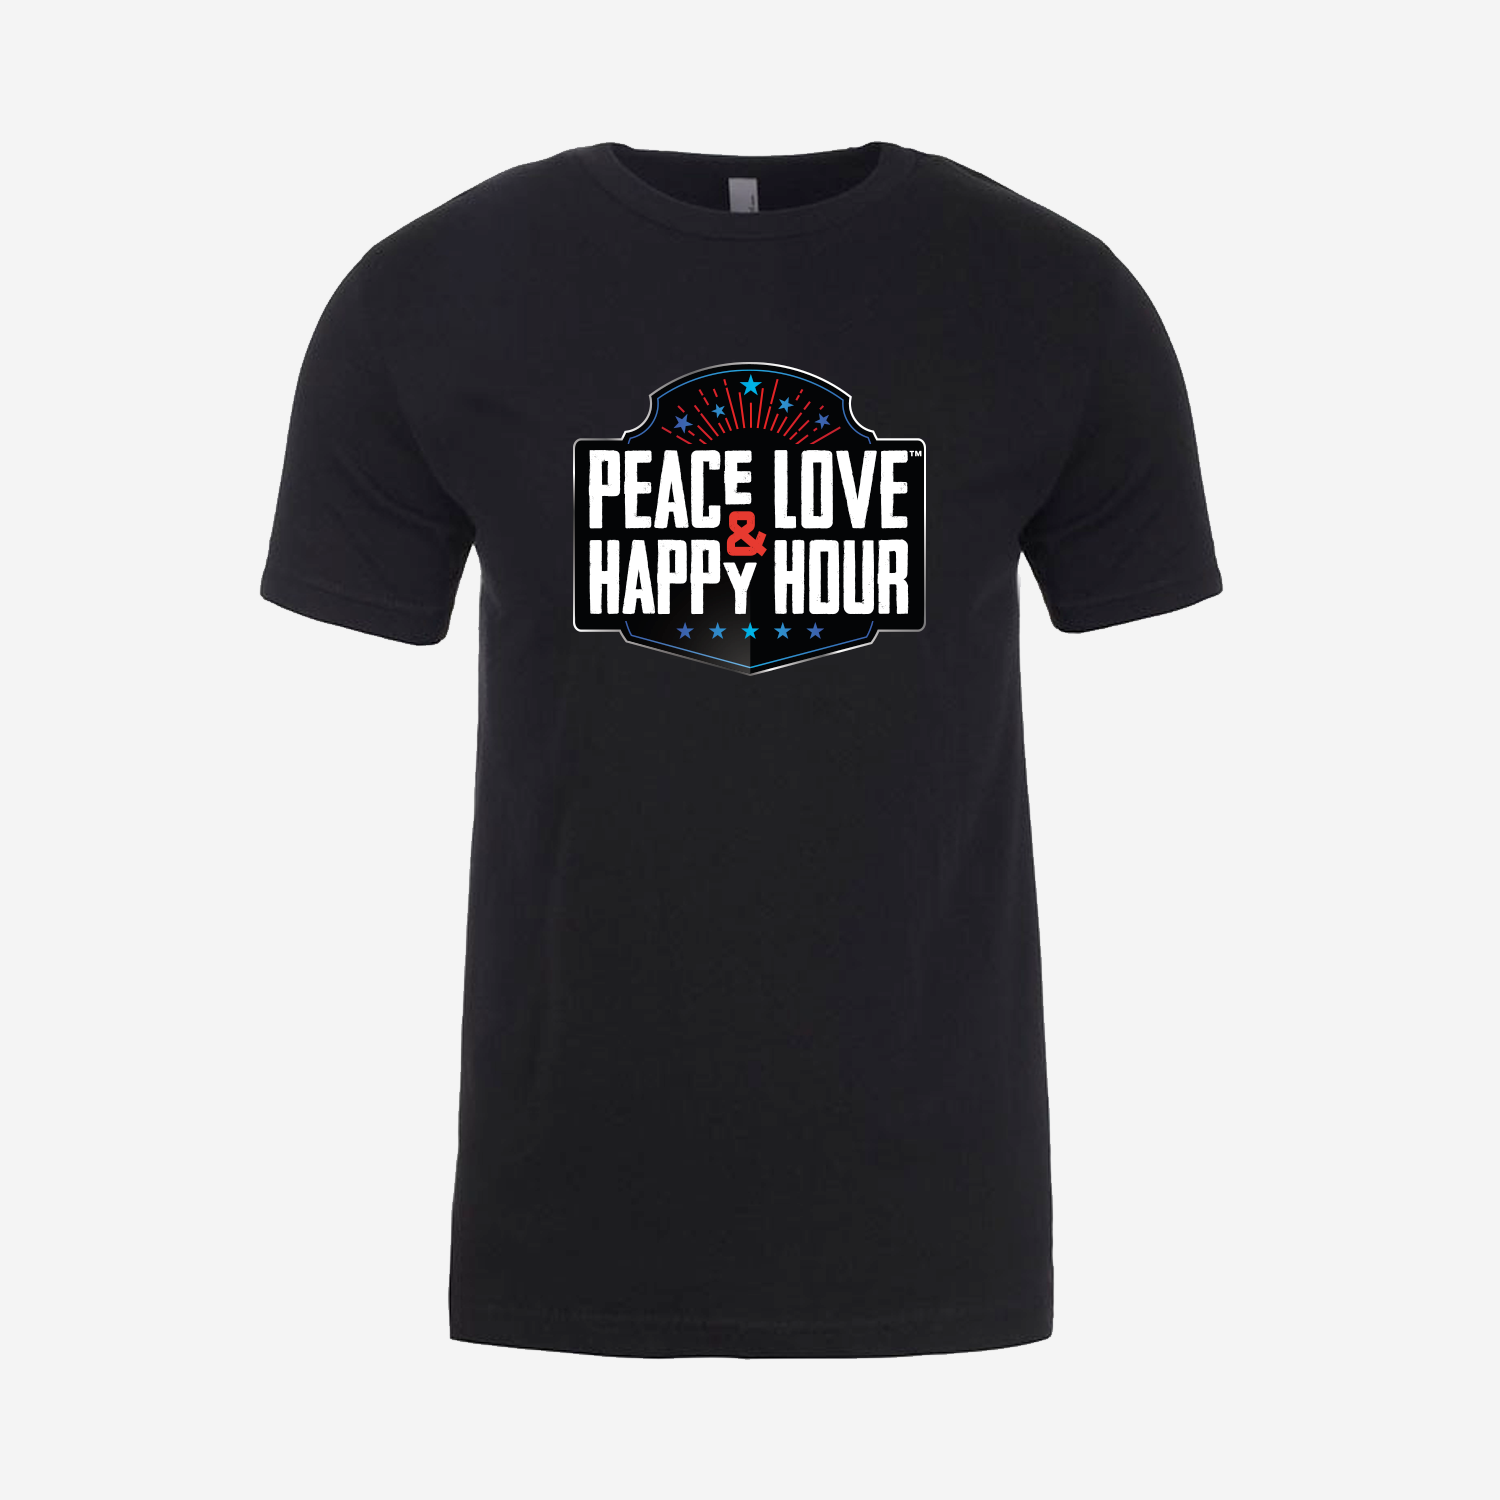 T-Shirt Badlands Peace and Love Hour – Happy